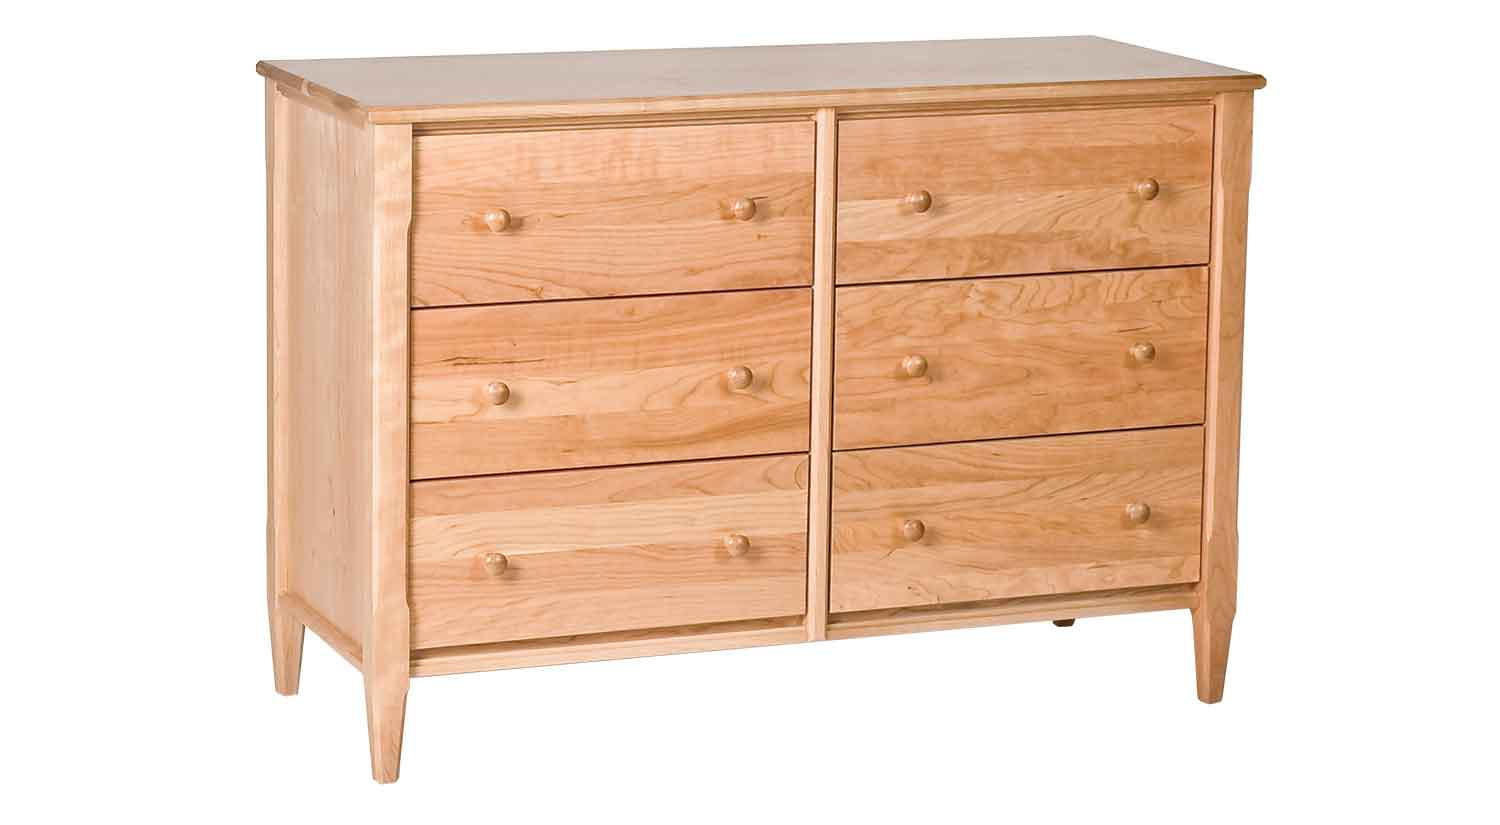 Small Bedroom Chest
 Circle Furniture Shaker Small Six Drawer Dresser